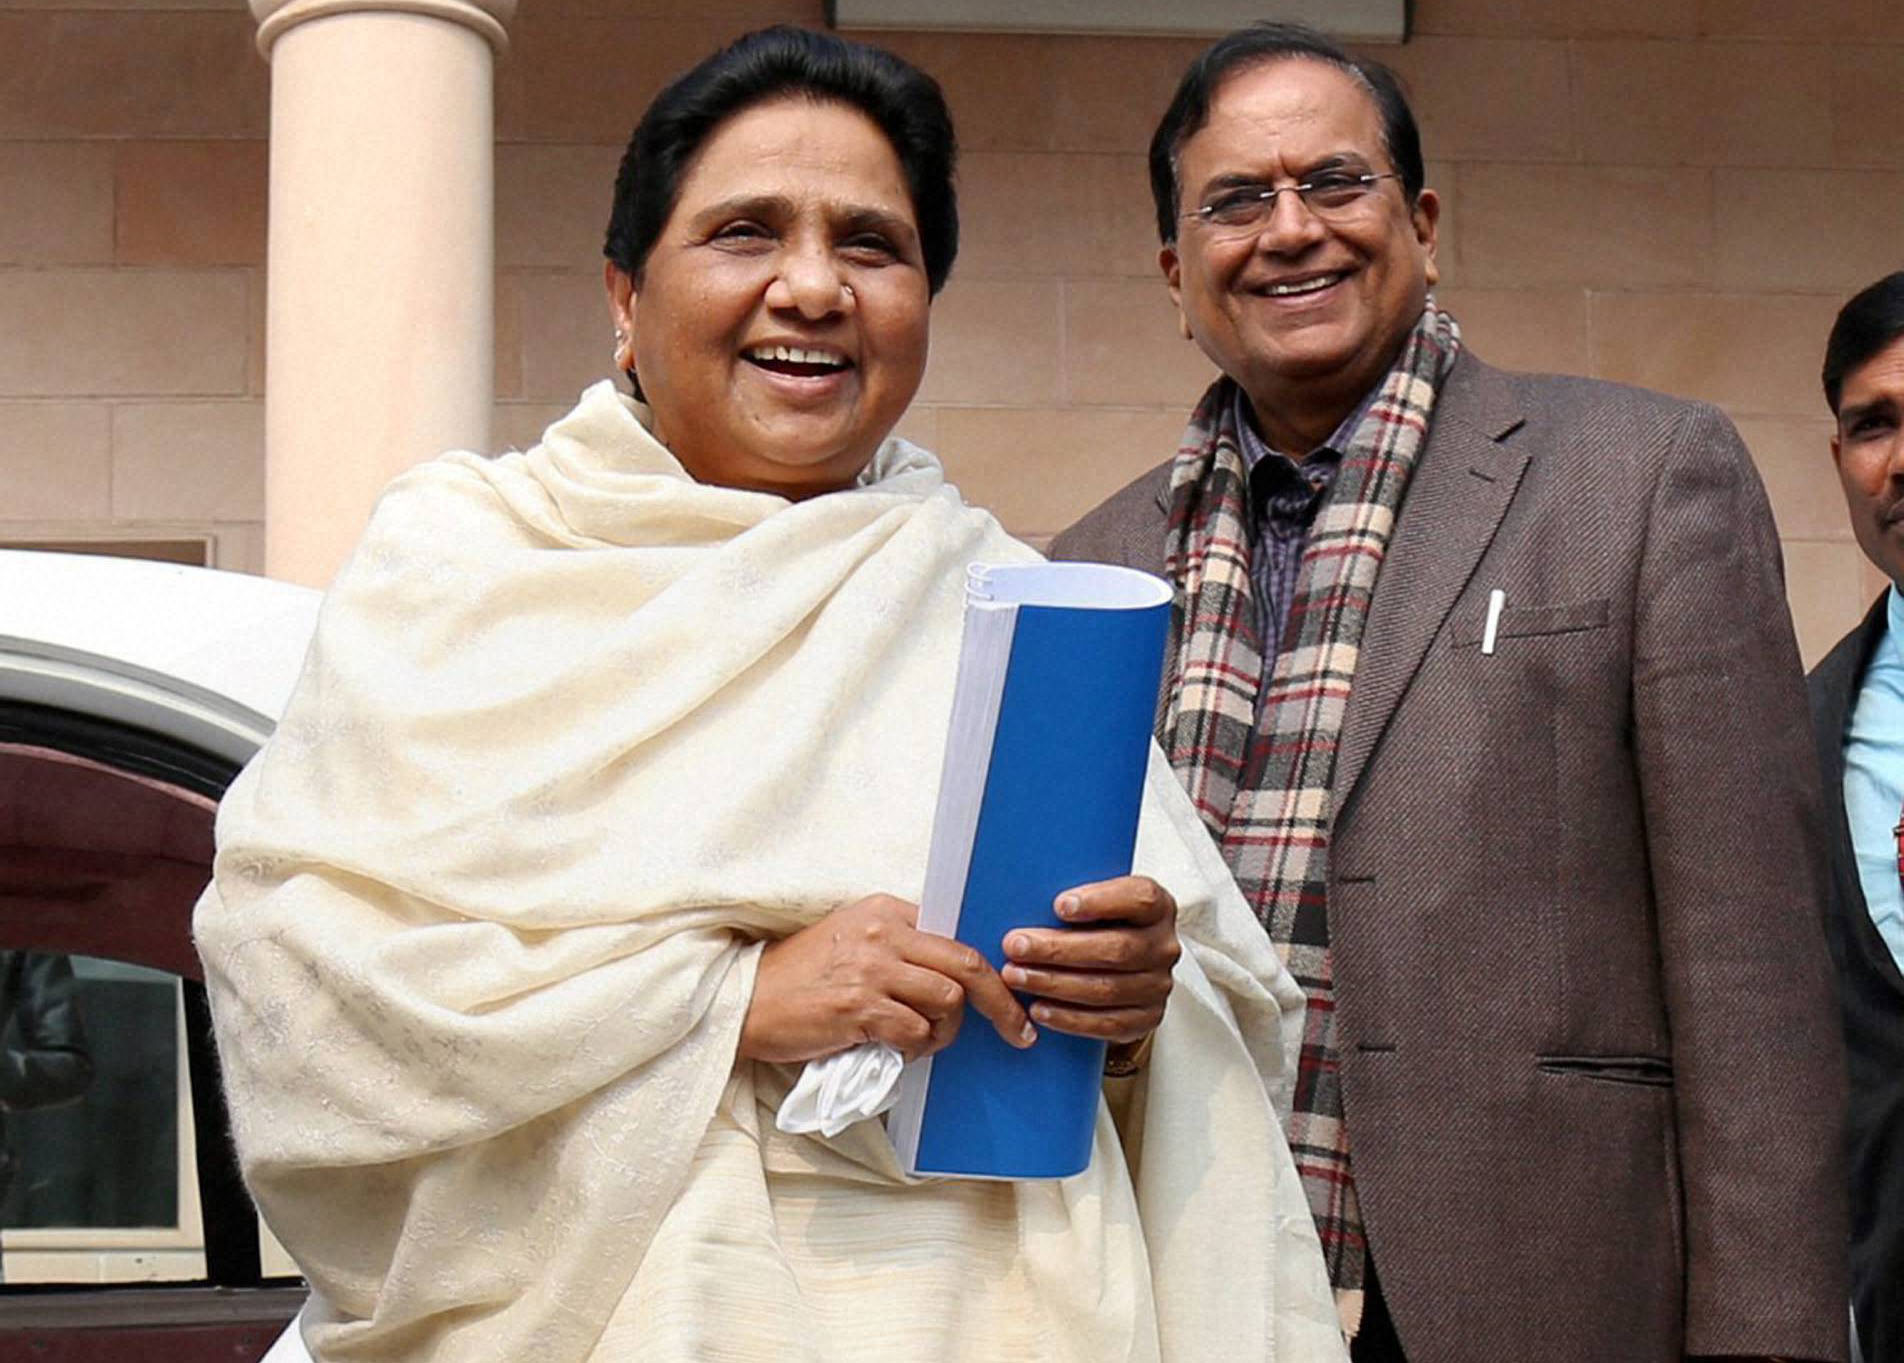 Union Budget could be used to influence voters: Mayawati